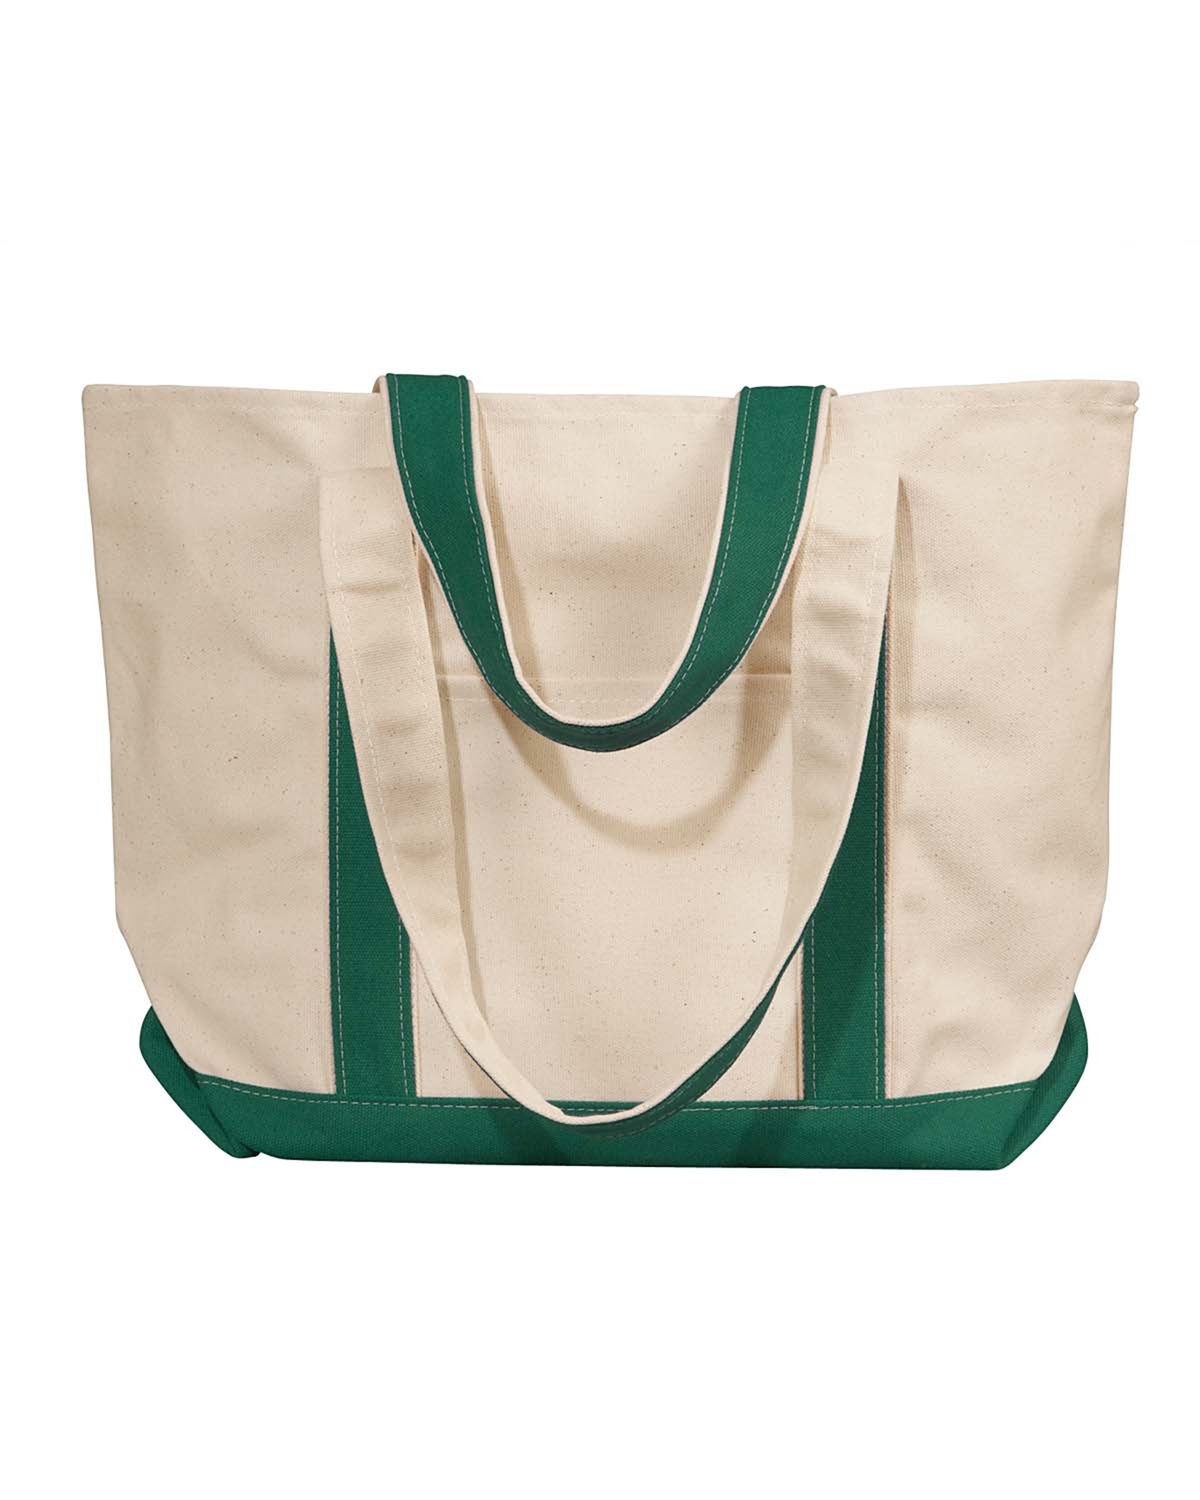 G009 8871 Large Cotton Canvas Classic Boat Tote